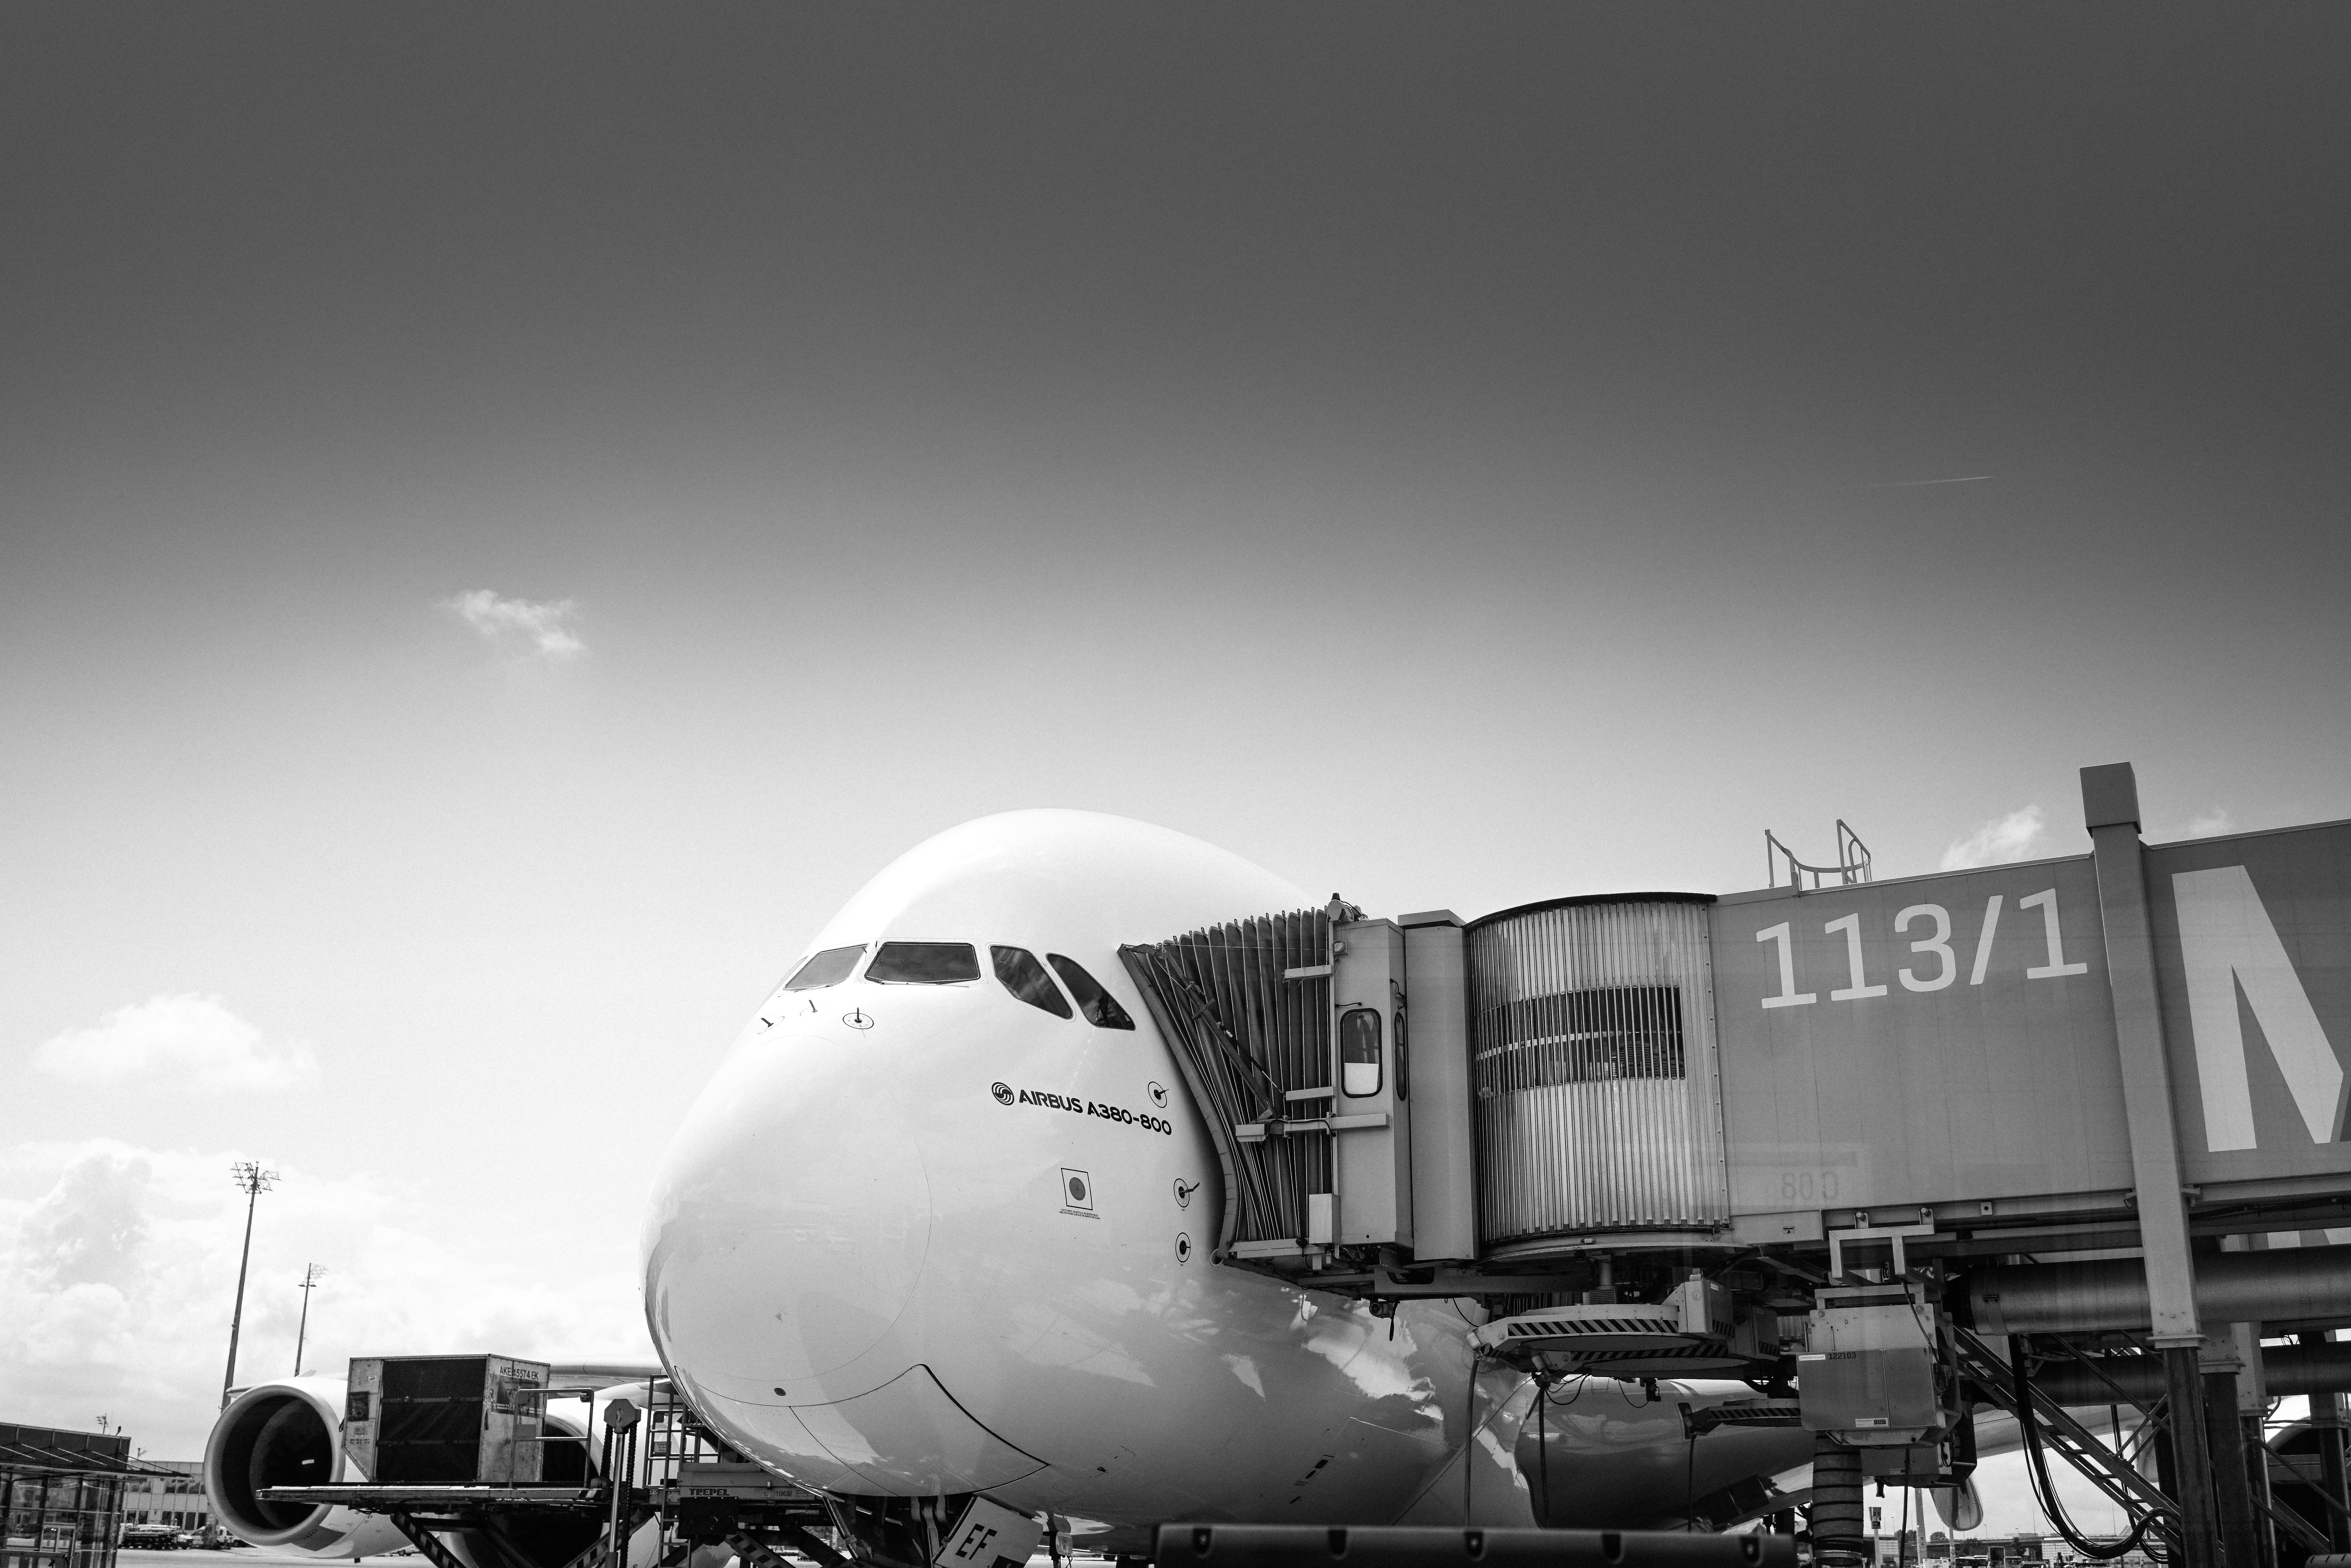 airplane in grayscale photography during daytime